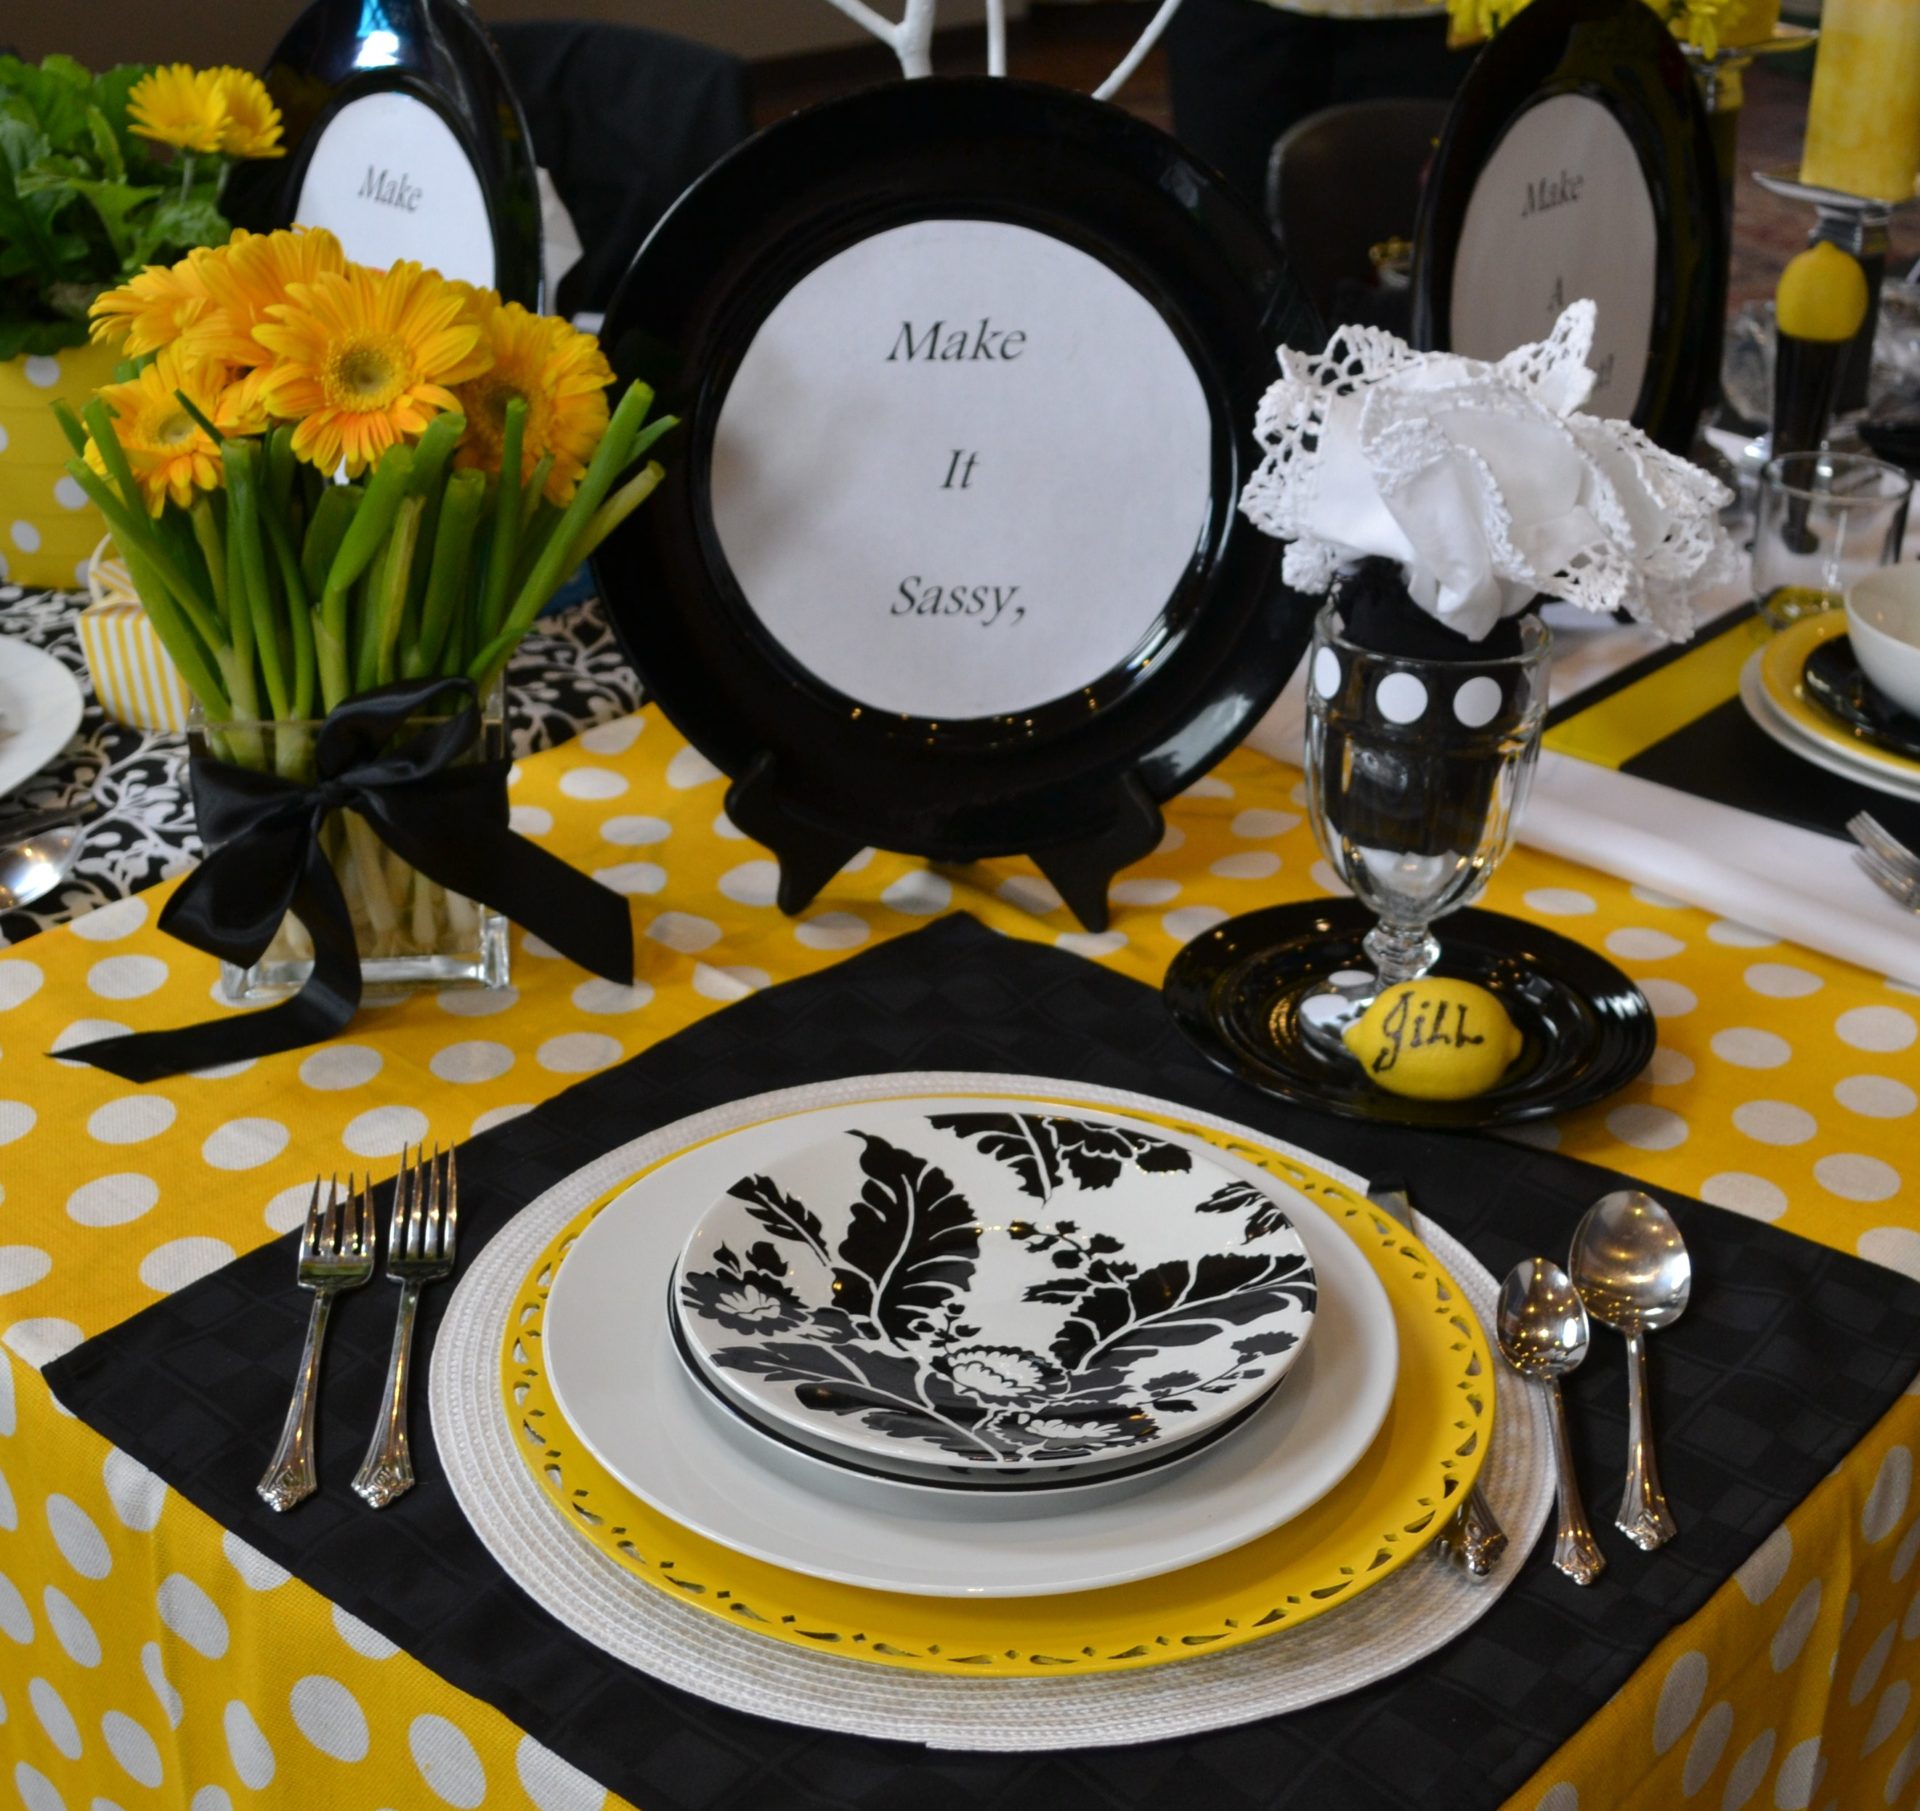 Black white yellow table placesetting at Relish Cooking Show lizbushong.com